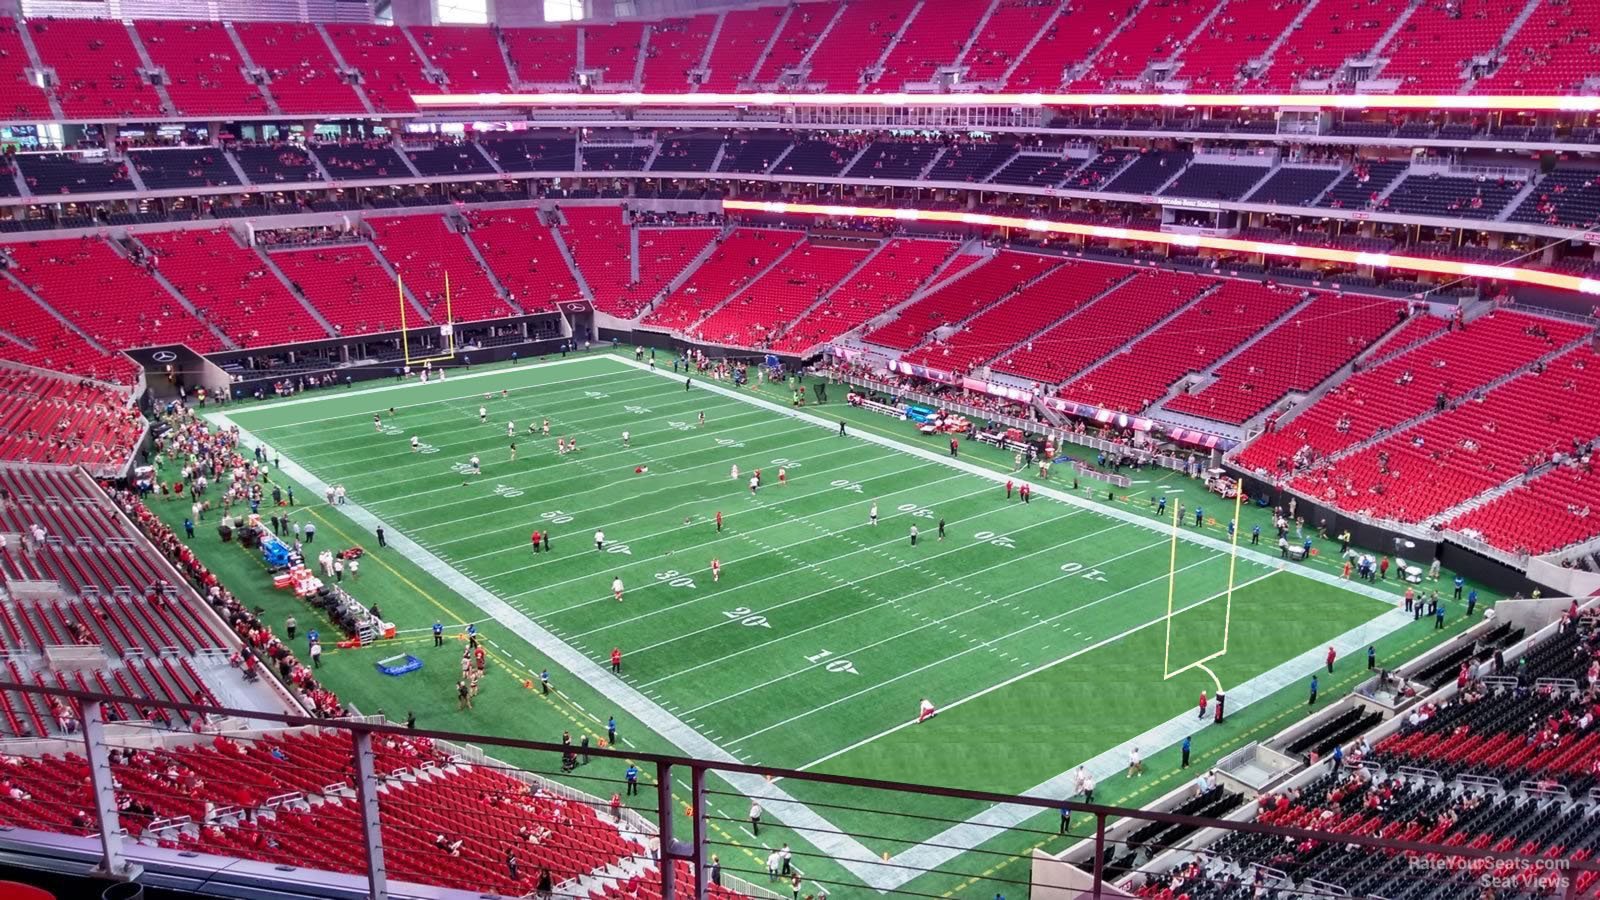 section 303, row 4 seat view  for football - mercedes-benz stadium